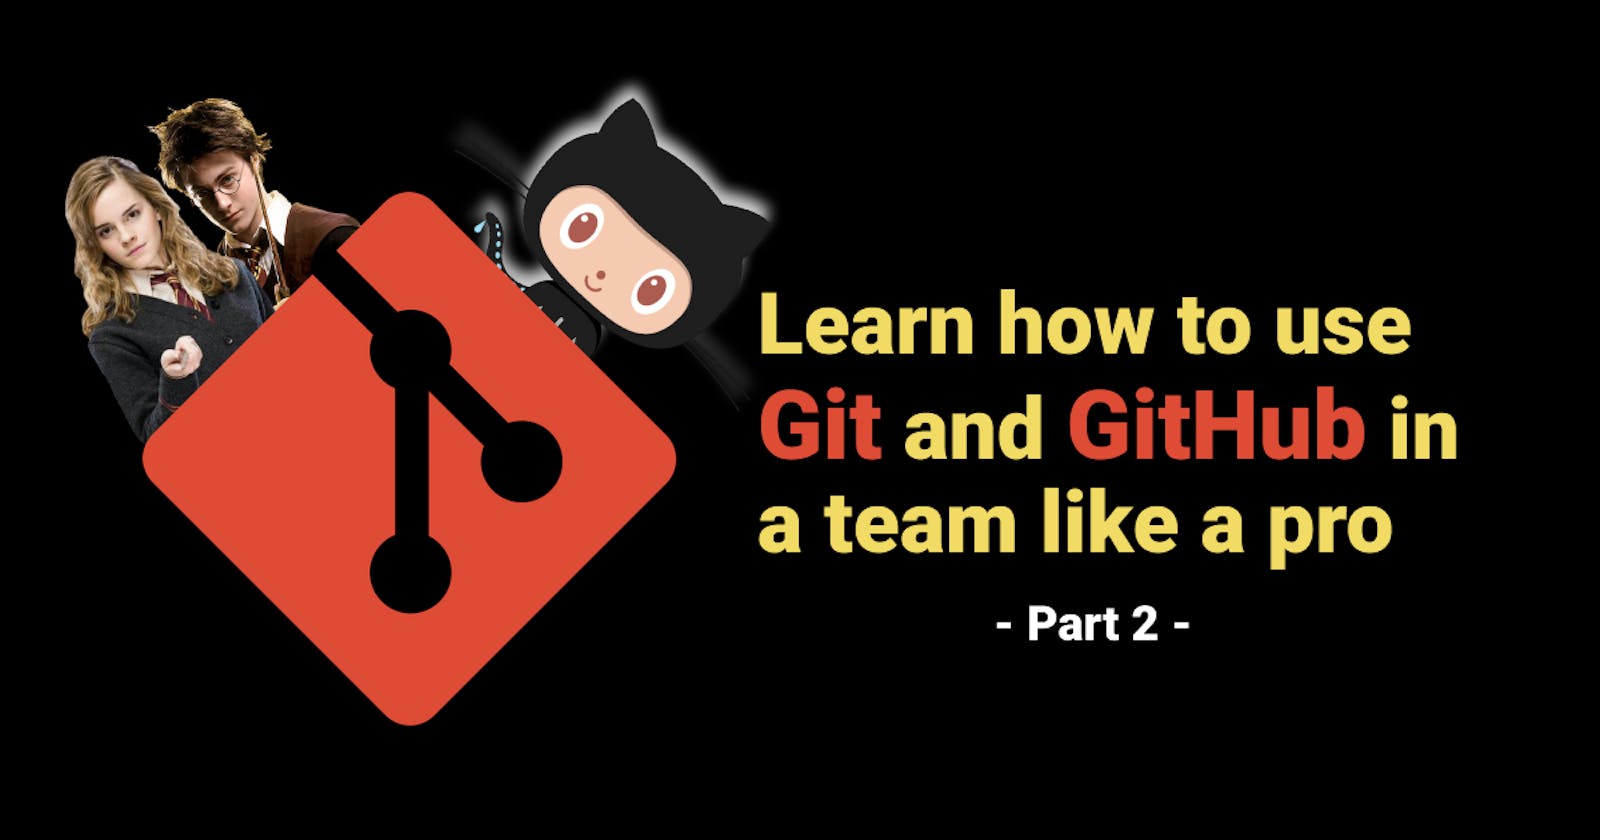 Learn how to use Git and GitHub in a team like a pro (part 2)